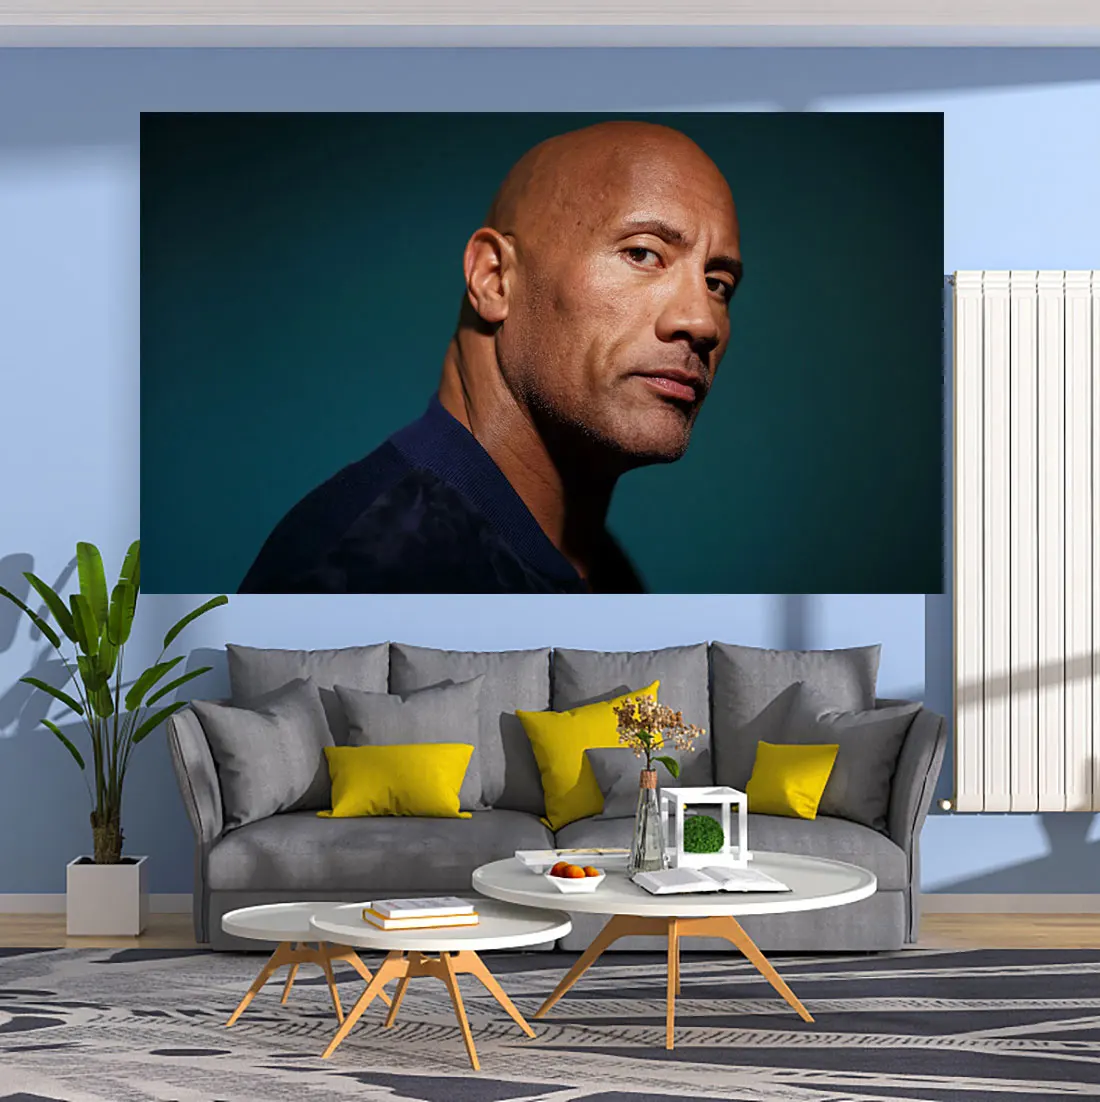 Cheat Day The Rock Eating Pancakes Wall Hanging Tapestry Funny Meme  Tapestry Aesthetic Dorm Tapestries Teen Room Decoration - Tapestry -  AliExpress